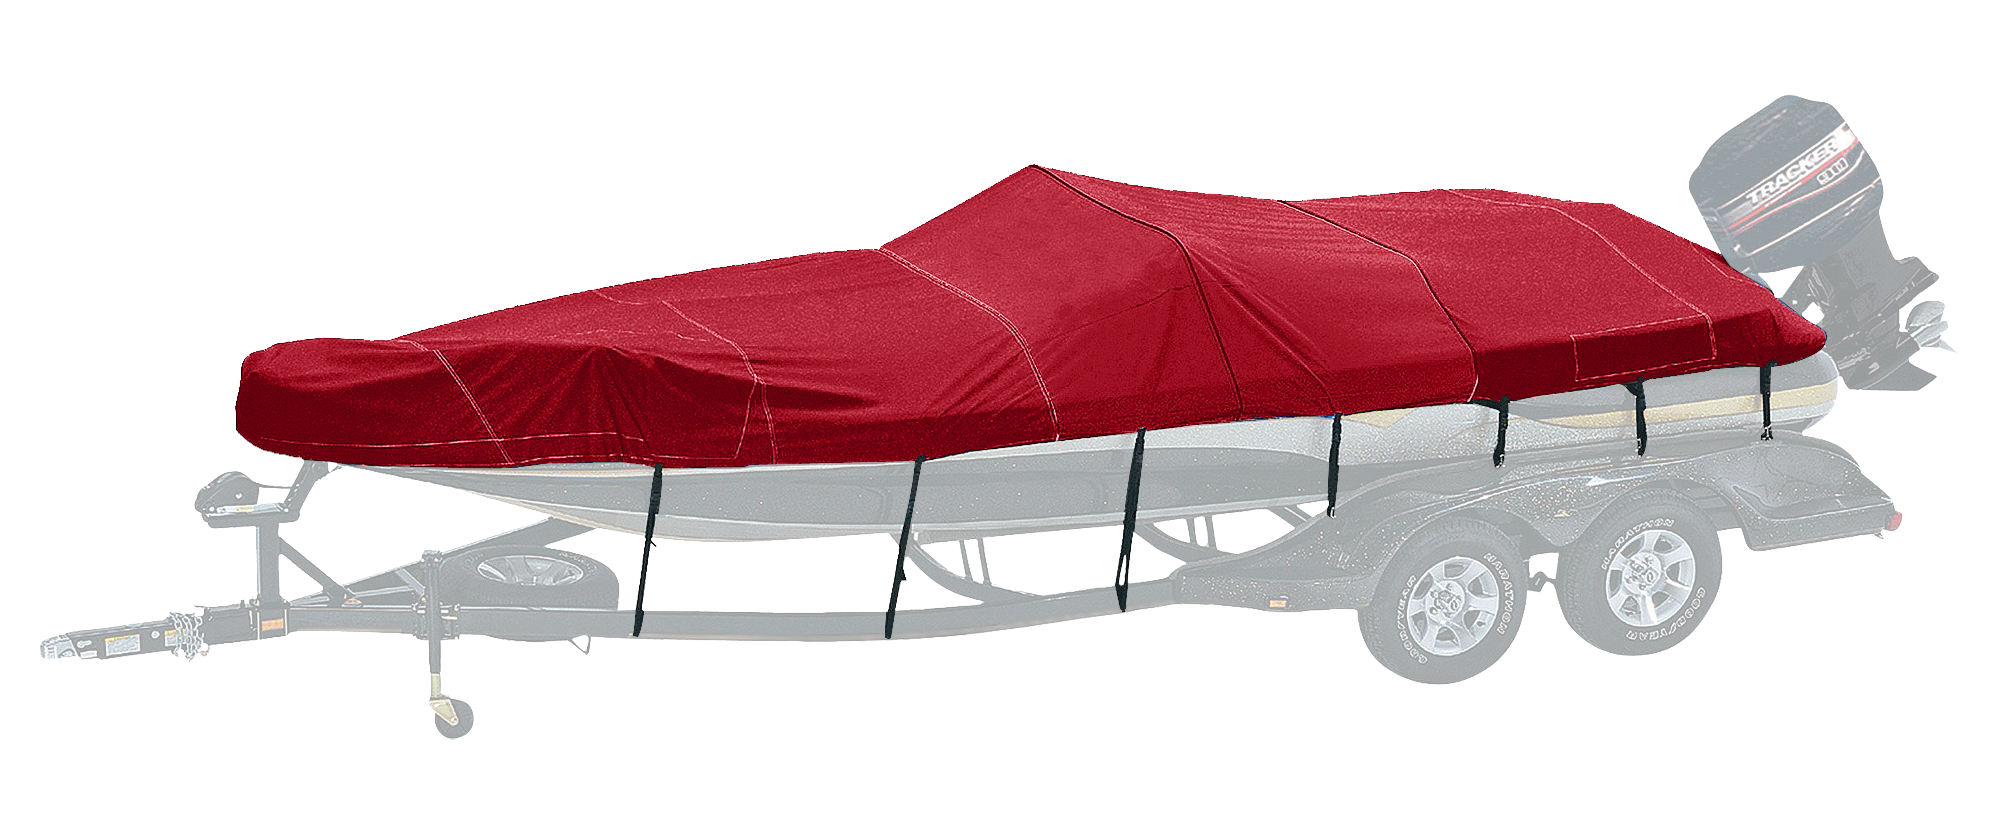 Bass Pro Shops Exact Fit Boat Cover by Westland - Tahoe - 2005 228 Deckboat I/O with Tower - Burgundy